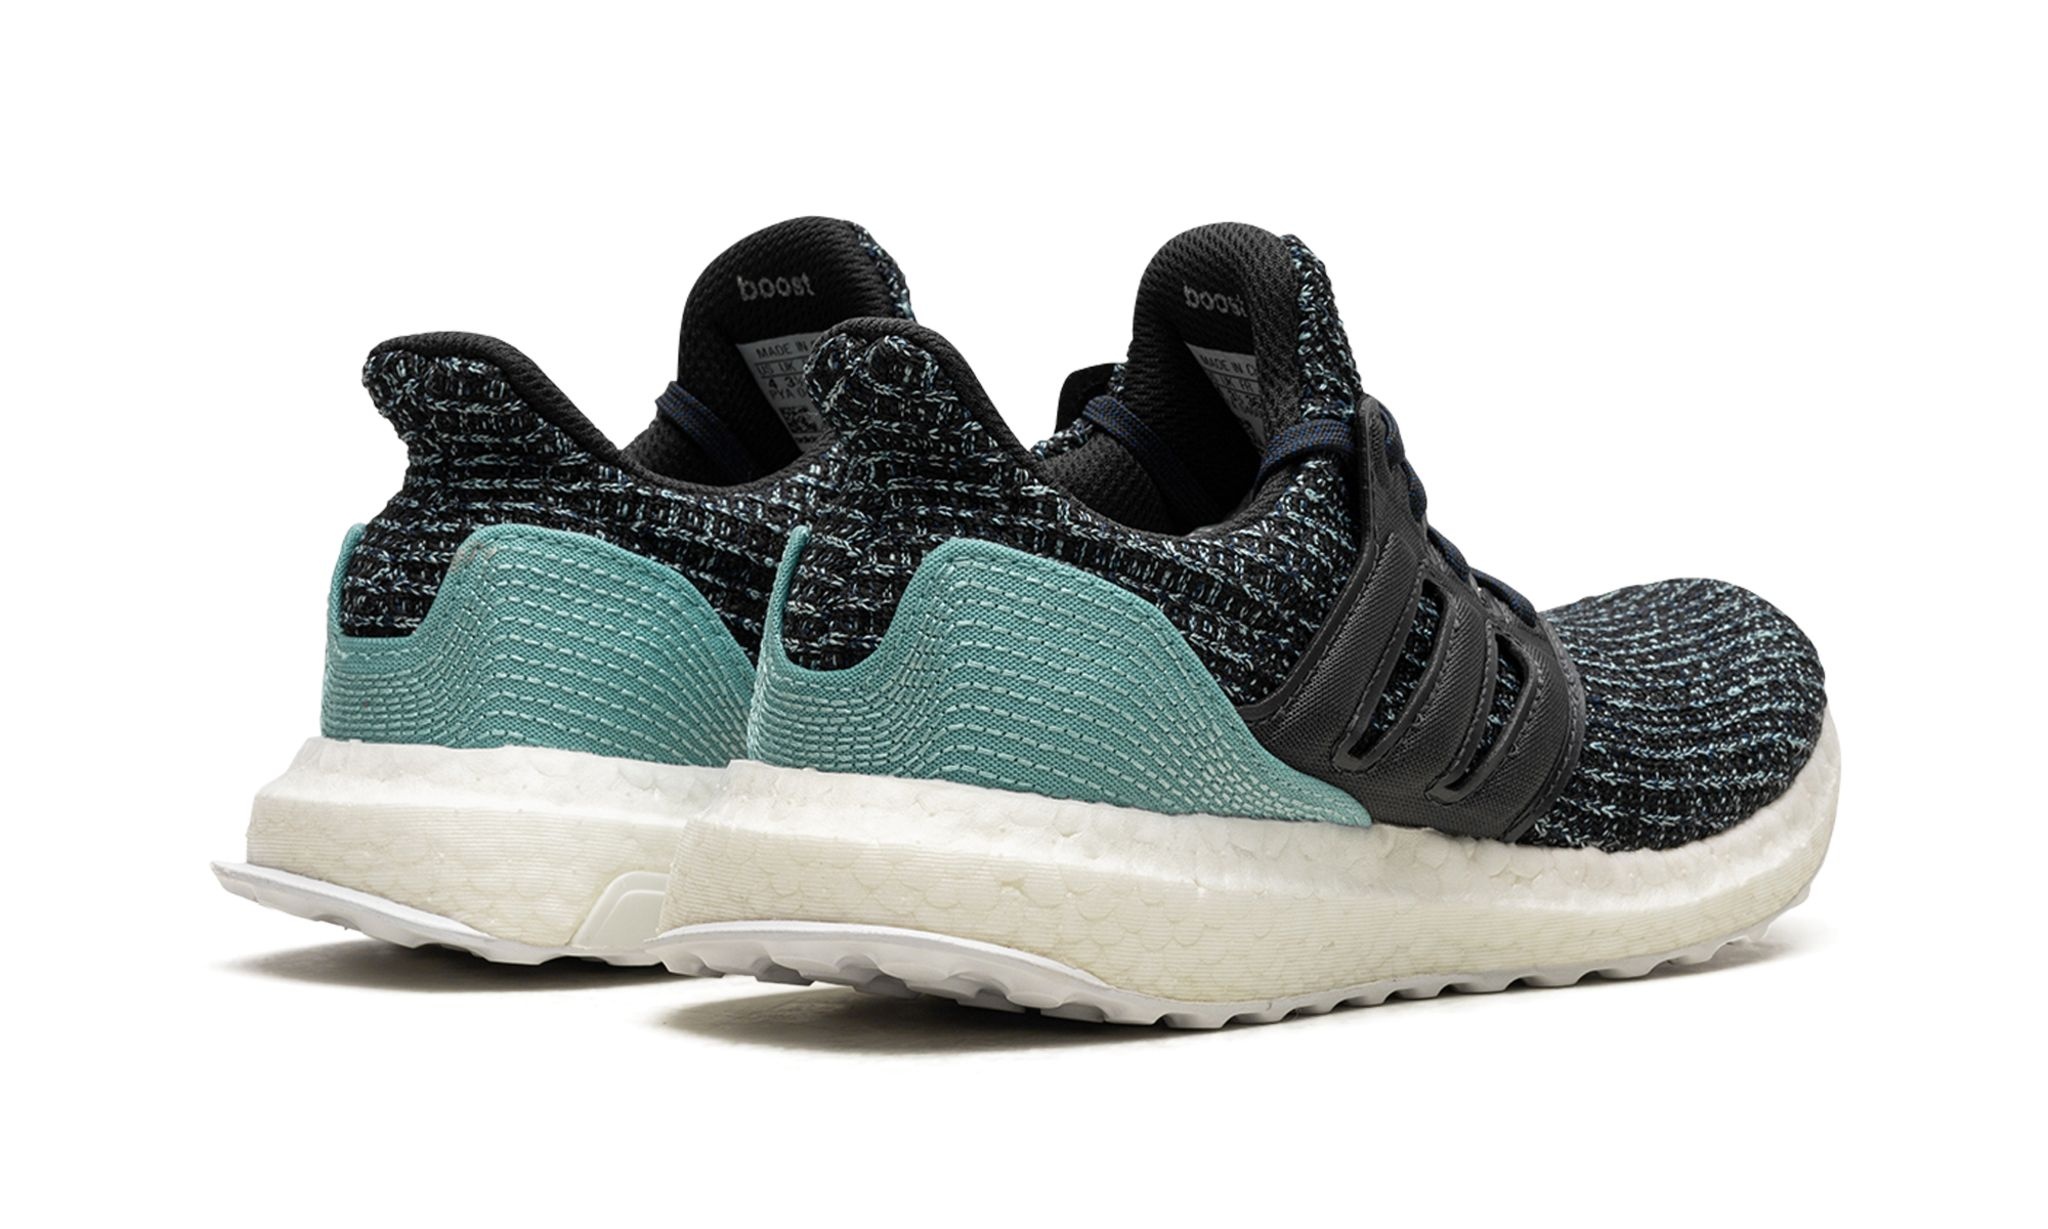 Parley x UltraBoost 4.0 "Carbon" - 3